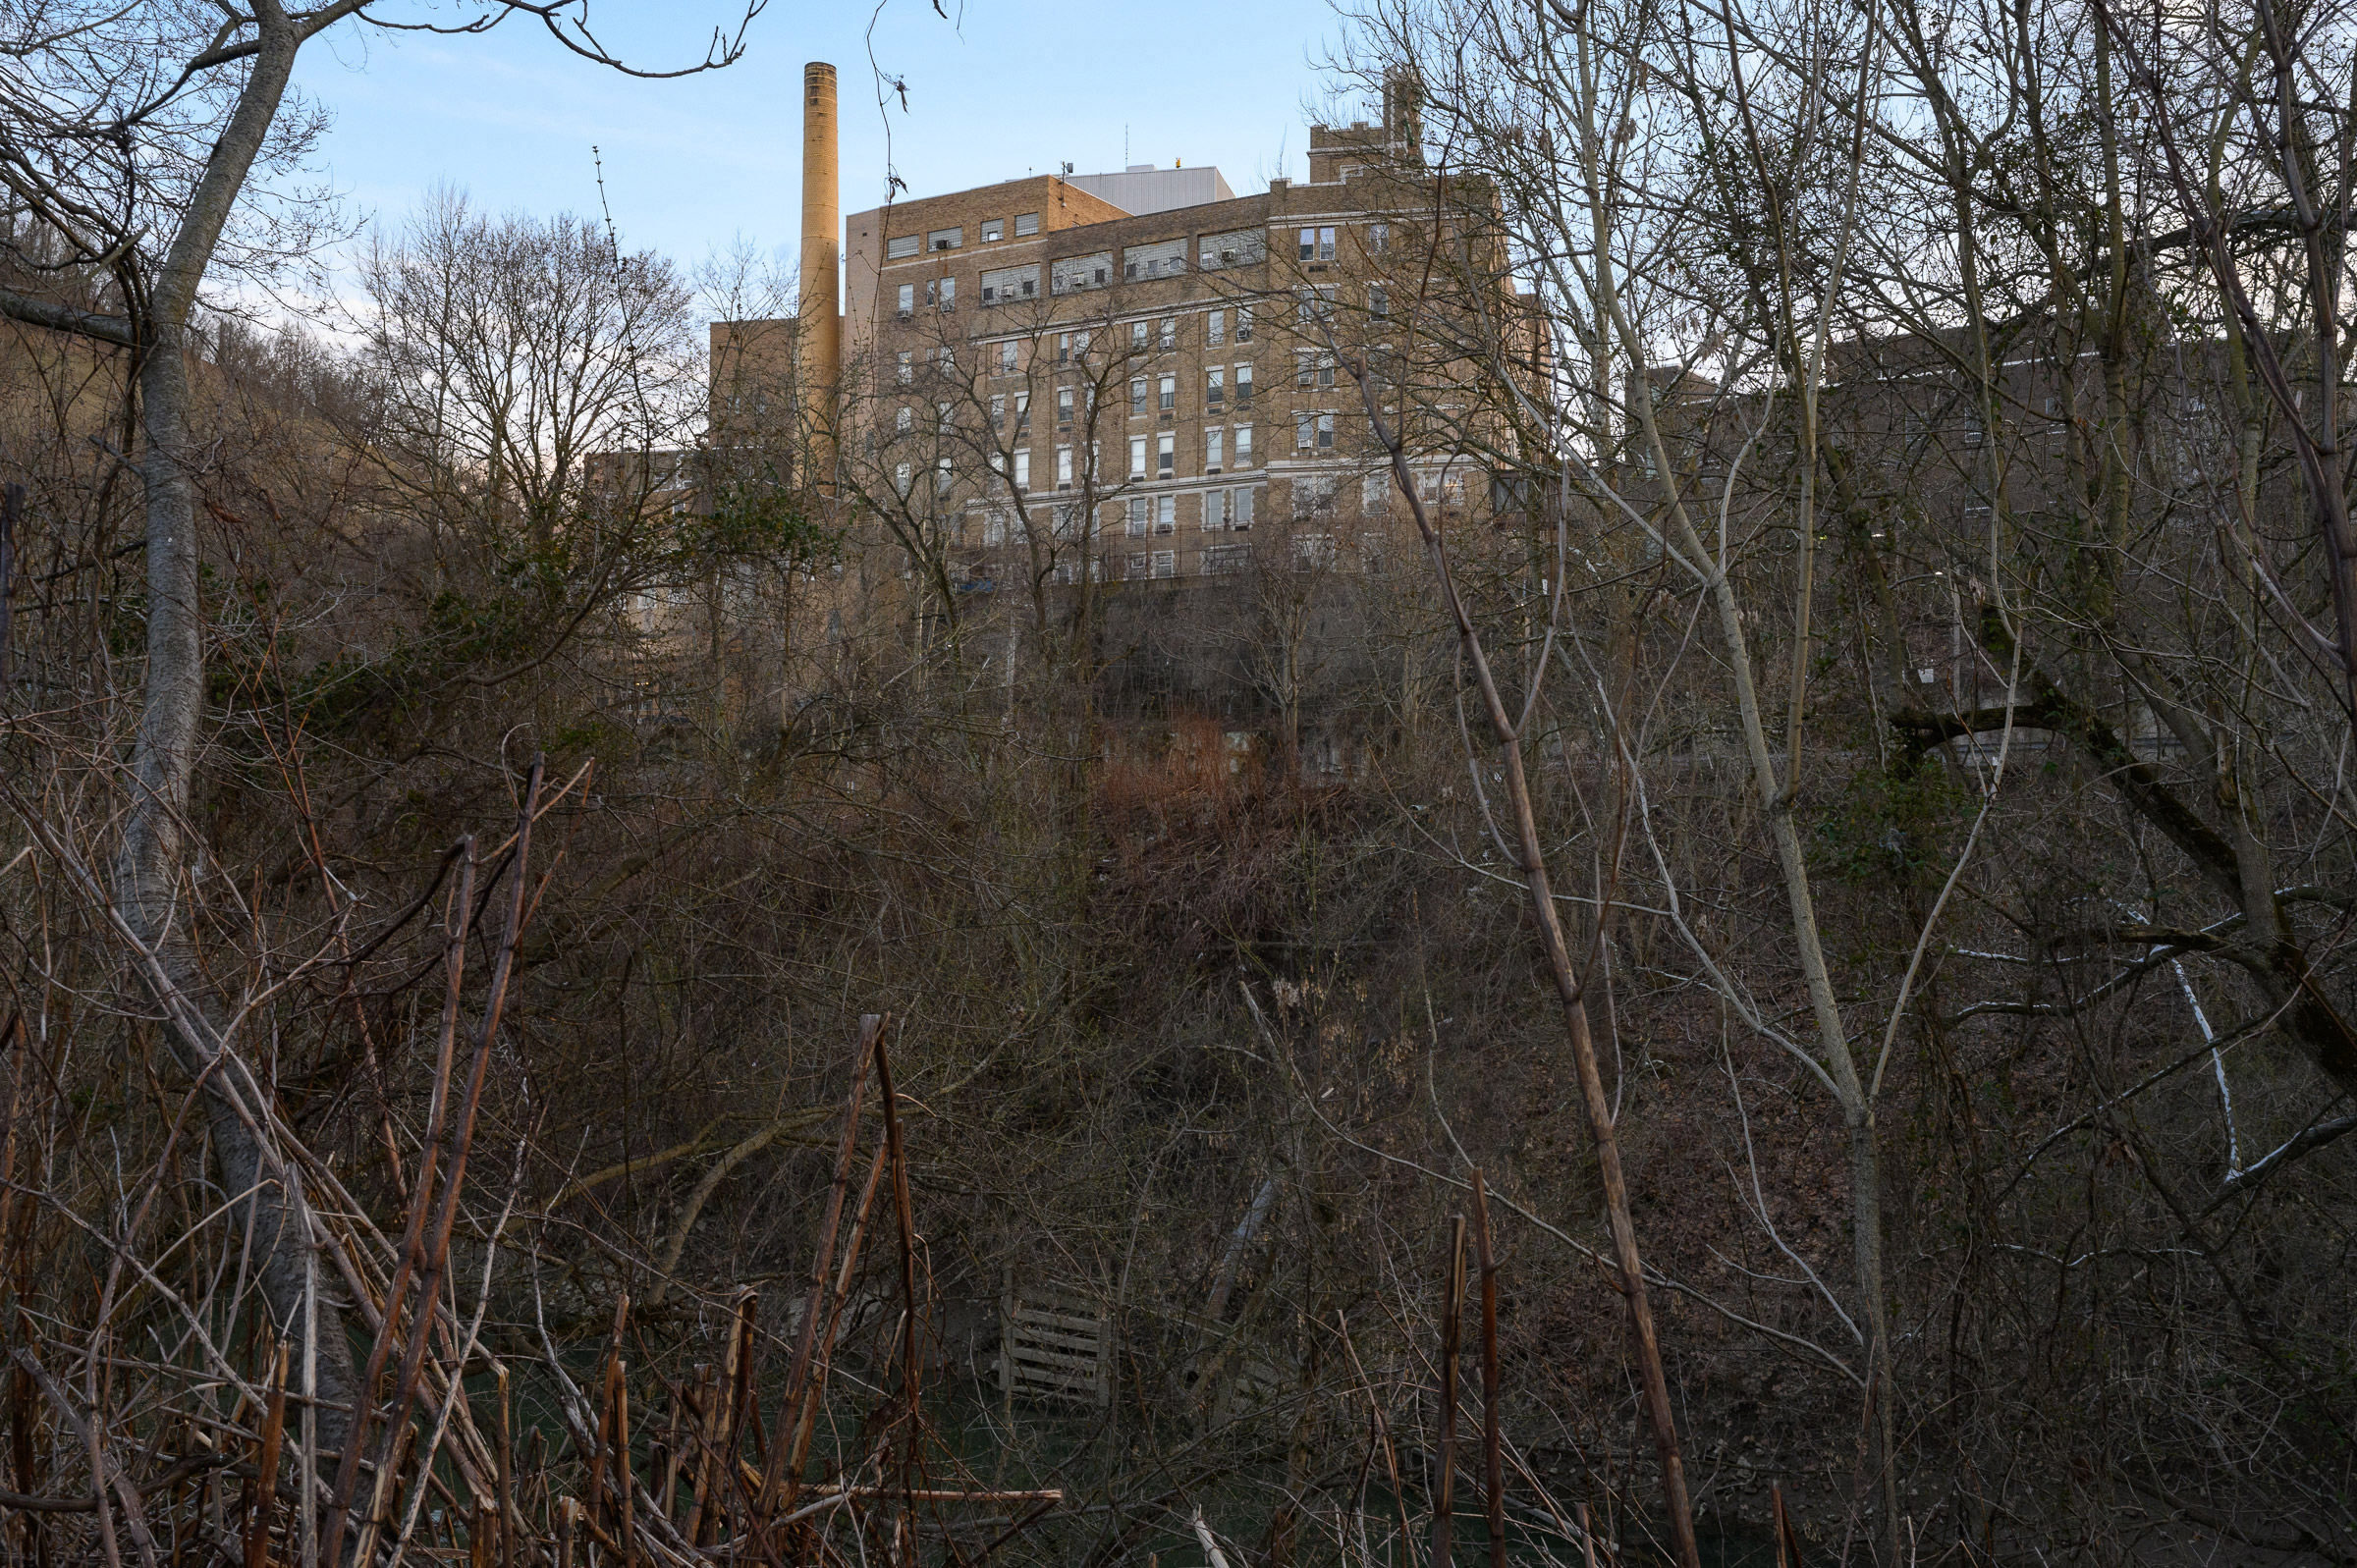 A view of the Ohio Valley Medical Center that closed in 2019, seen from the former encampments along Wheeling Creek in March.